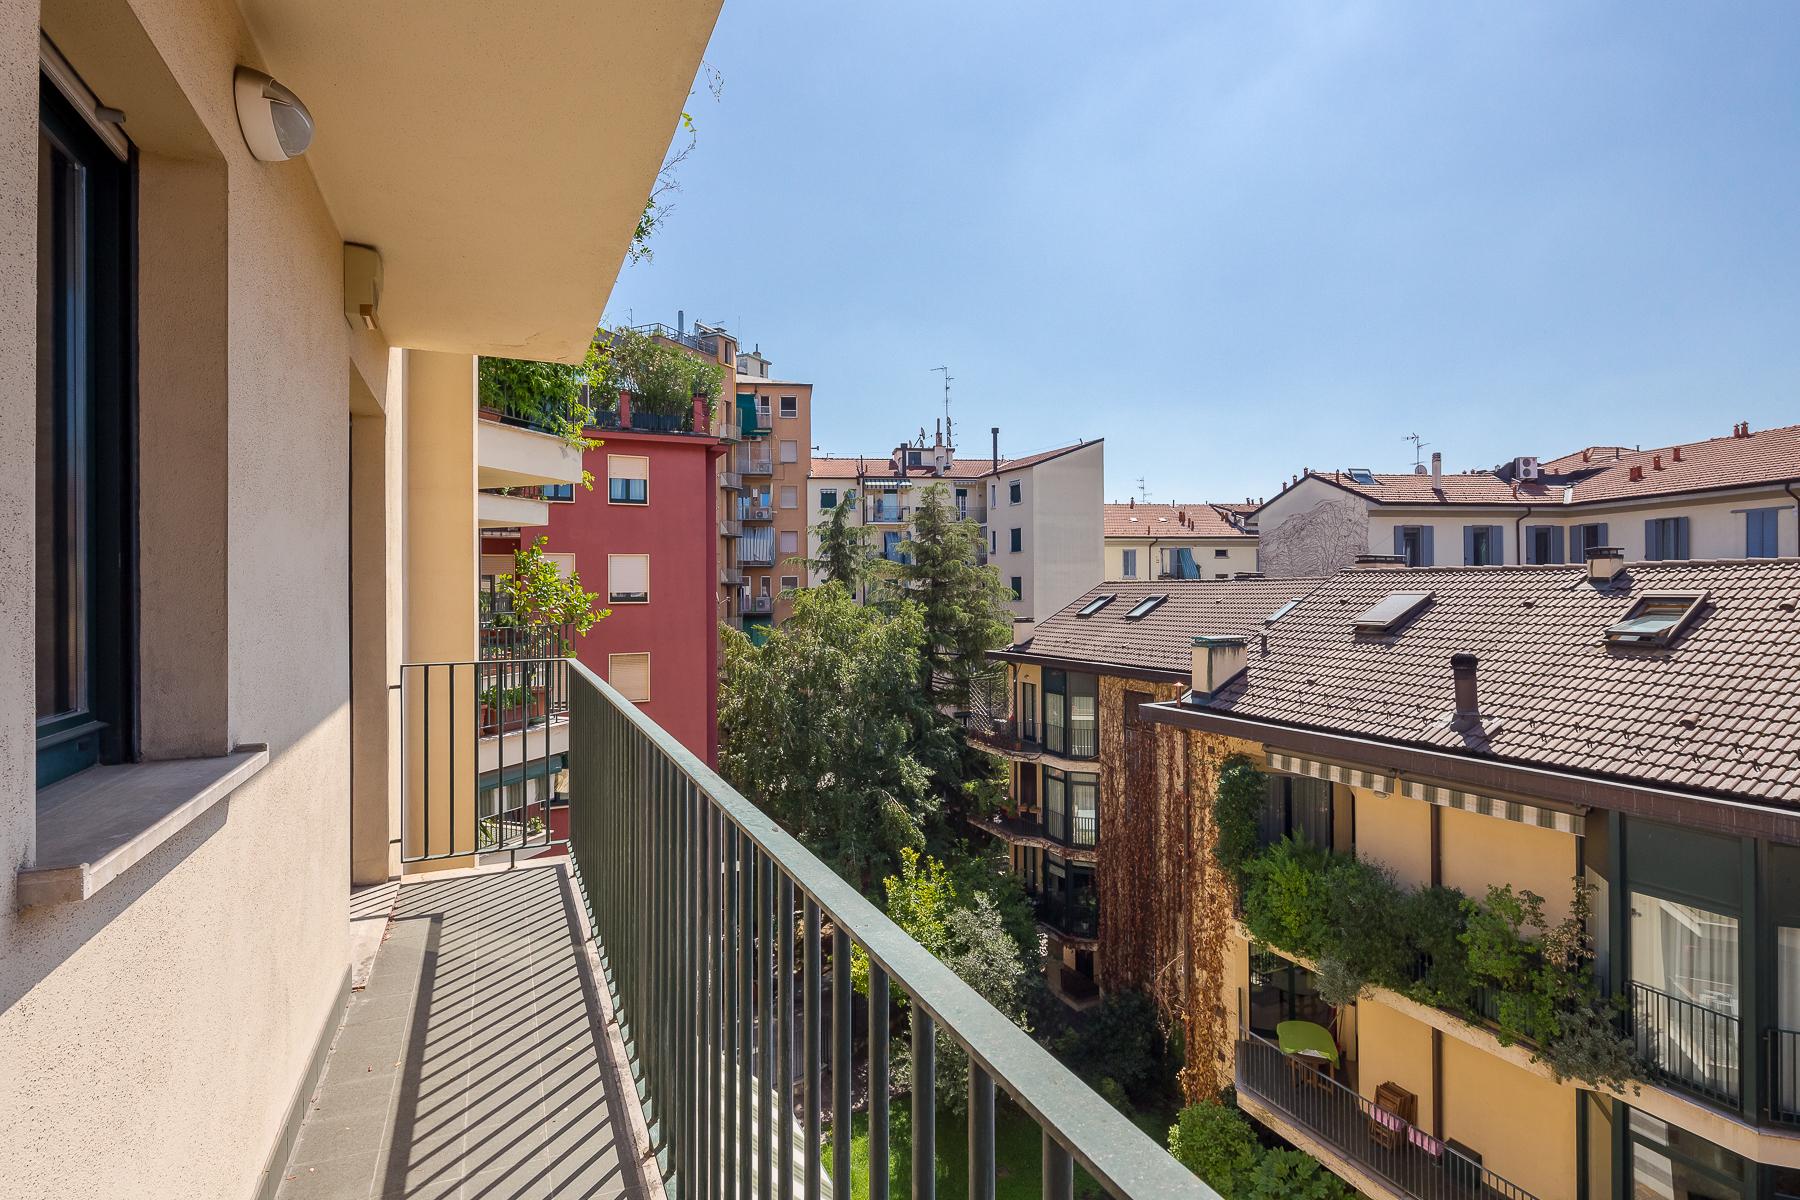 Charming three-room apartment with terrace of 33 sqm approx. - 20